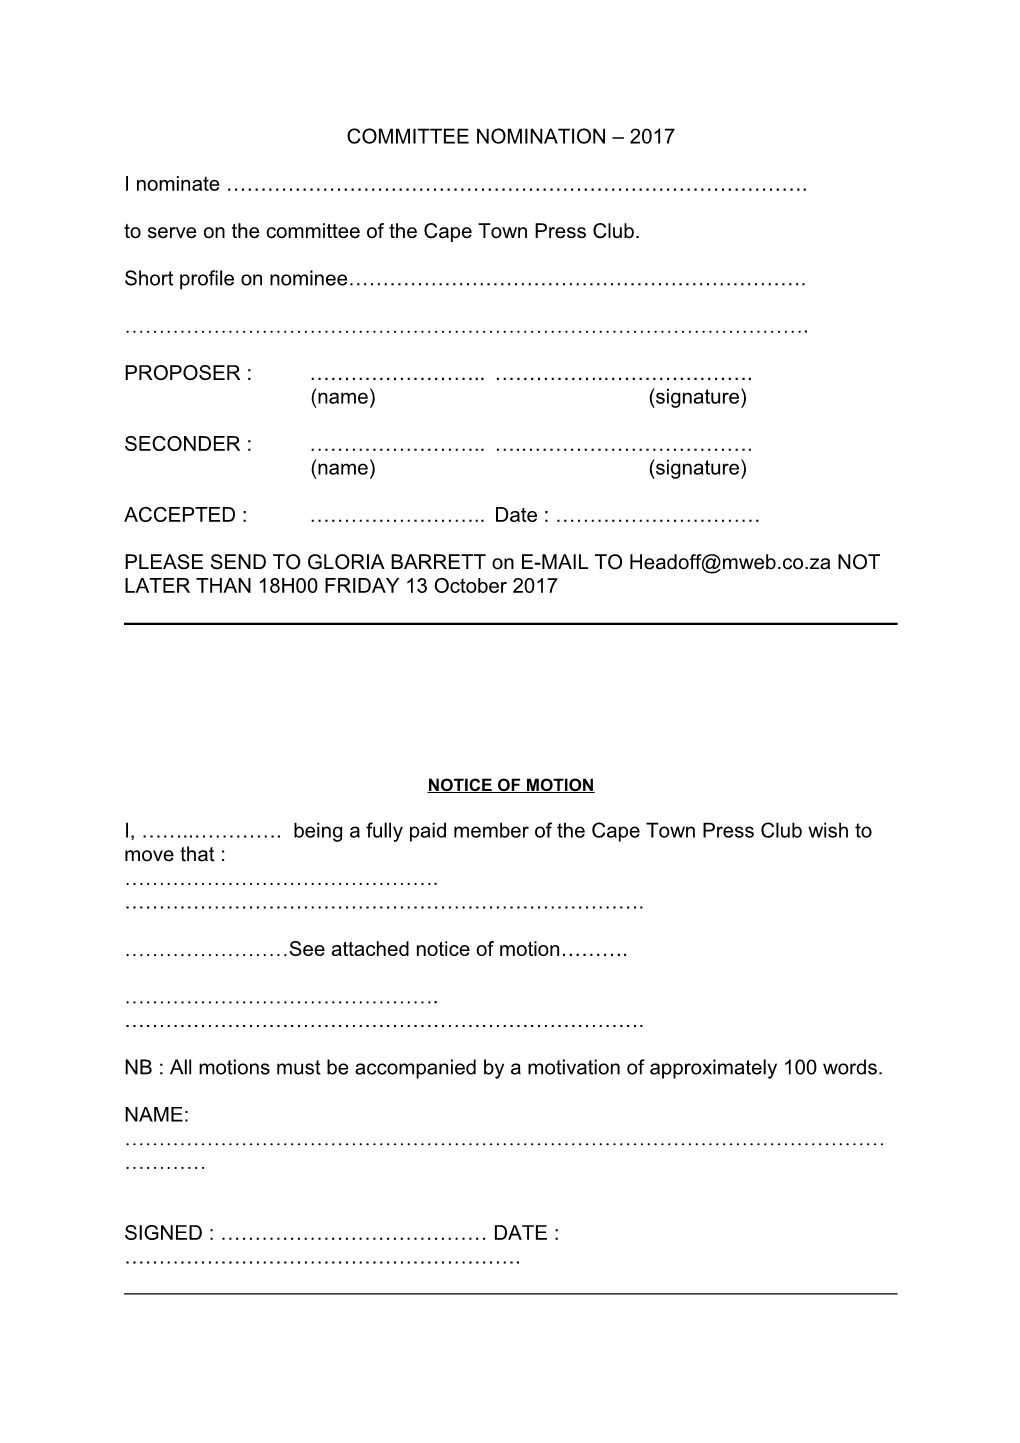 Notice of the Annual General Meeting of the Cape Town Press Club at the Pavillion